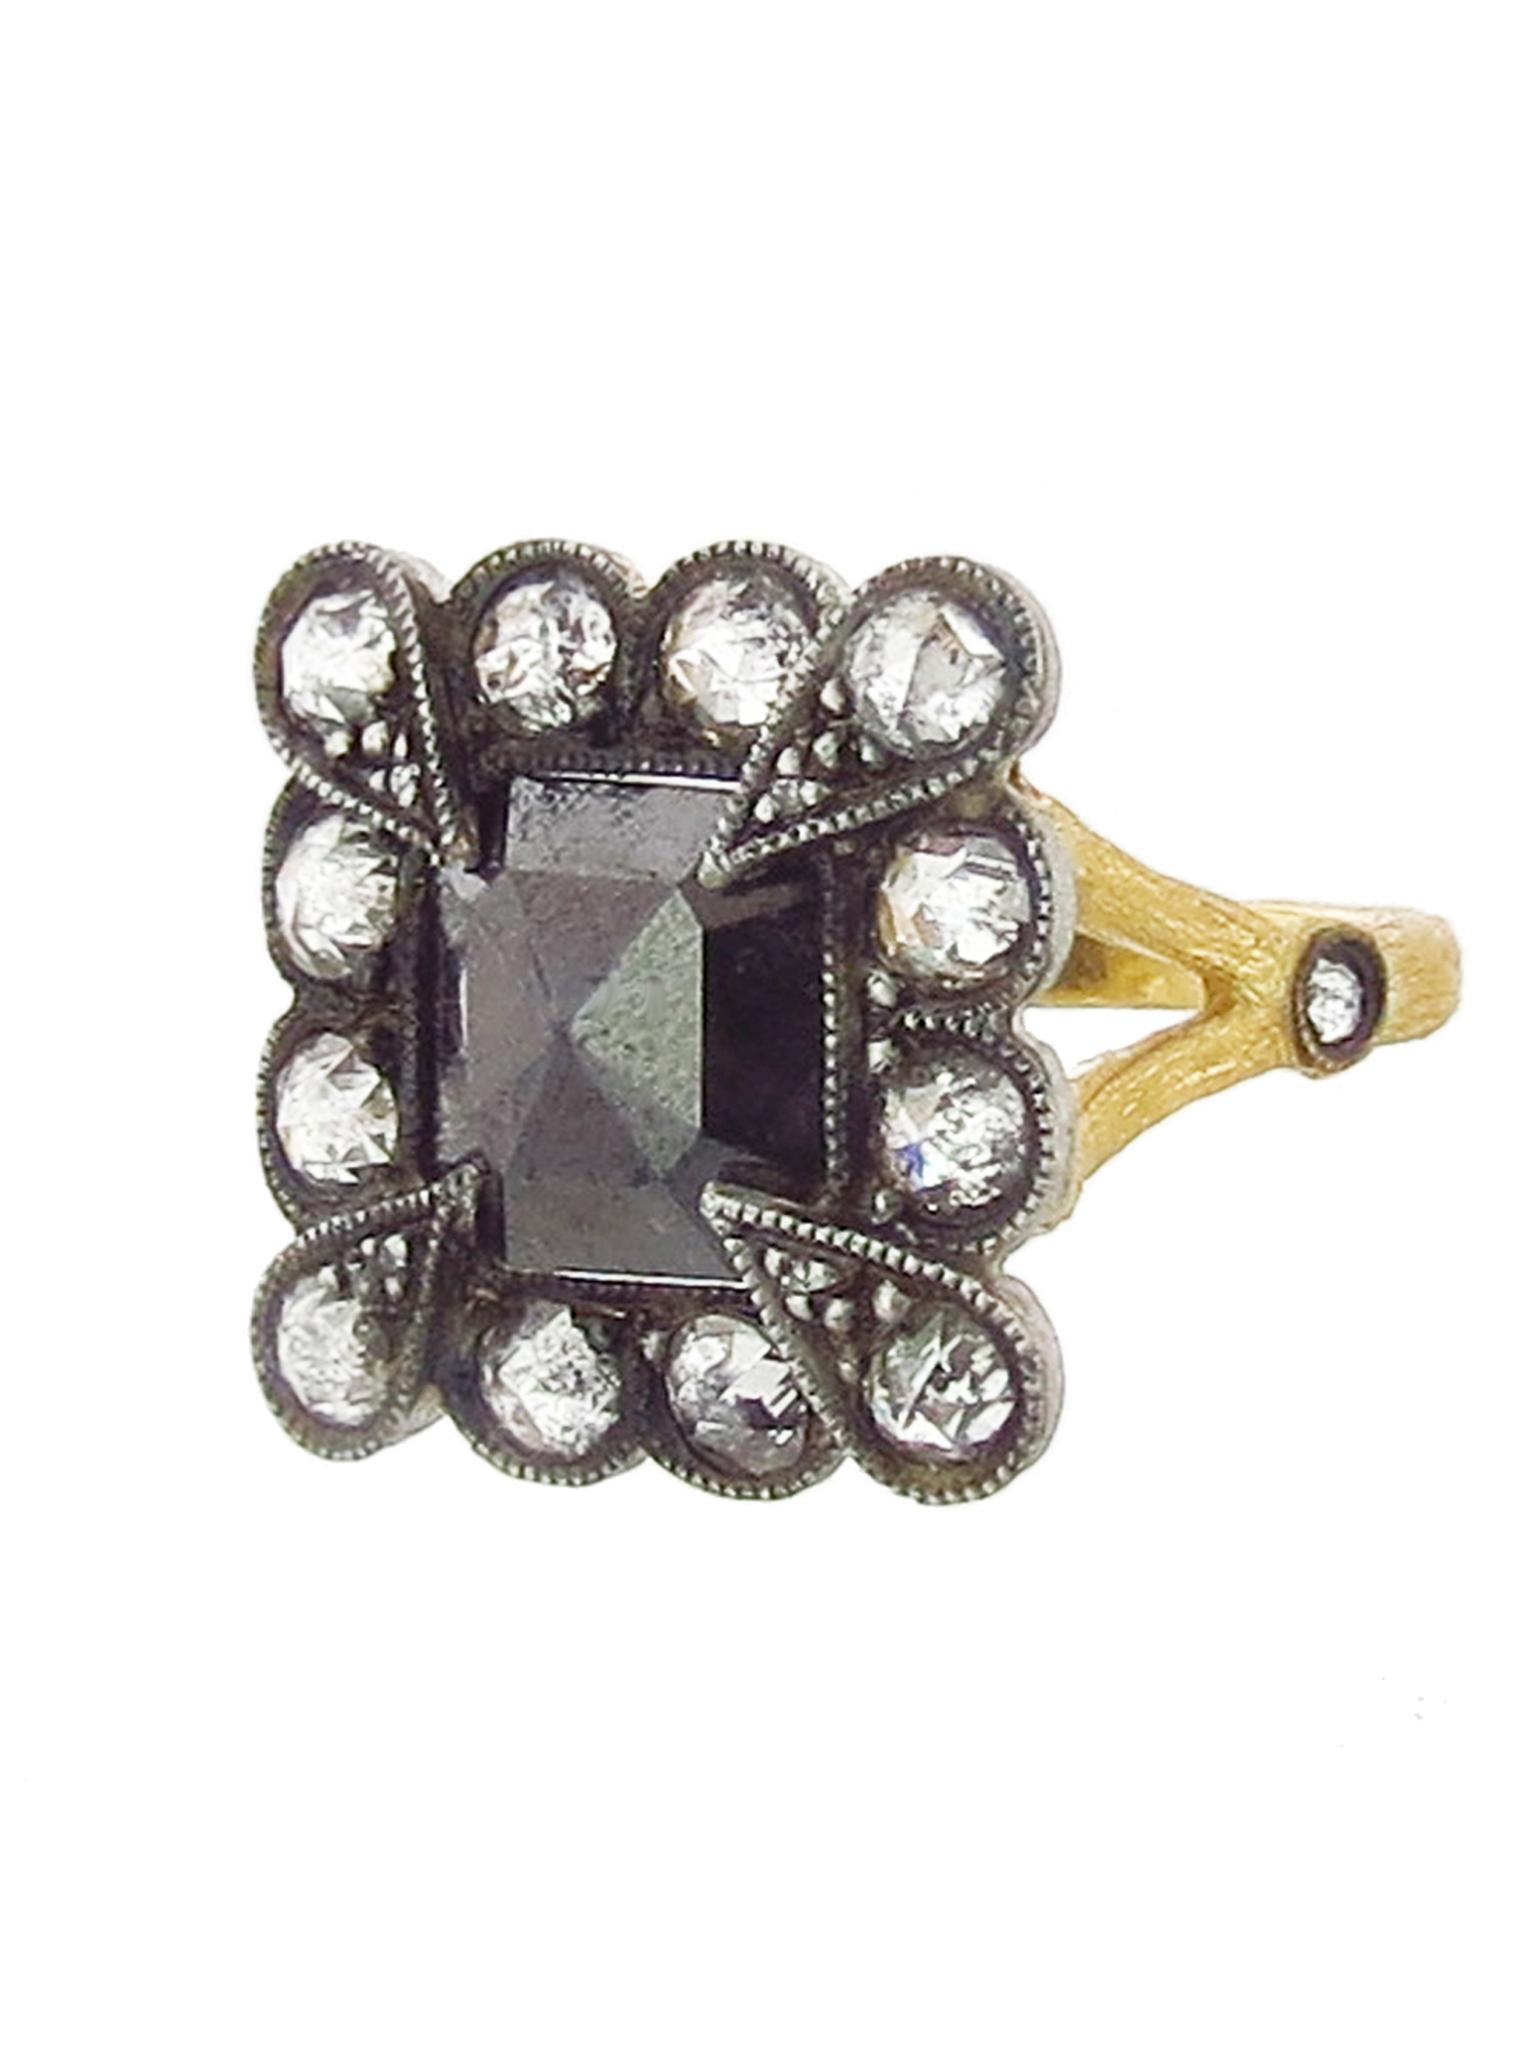 A one-of-a-kind Cathy Waterman black diamond Lace Edge ring featuring a 2.65ct diamond in a scalloped frame of white diamonds on her signature branch band in 22ct gold. Available at Ylang 23 (£5,355.18).